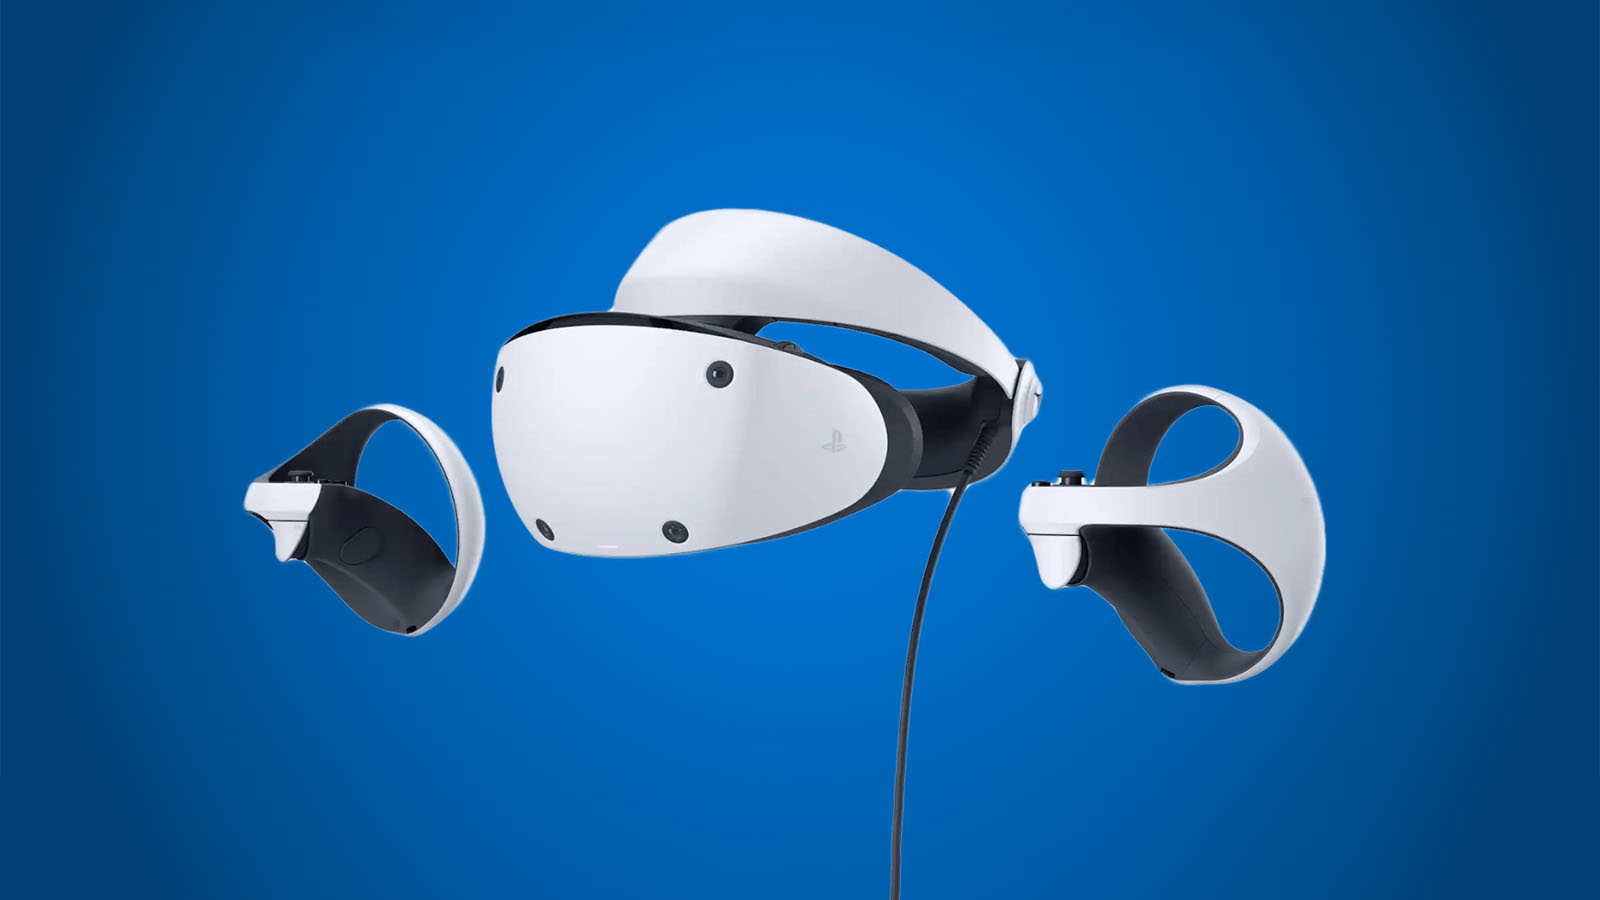 PlayStation VR2 Doesn't Seem To Have PC Support